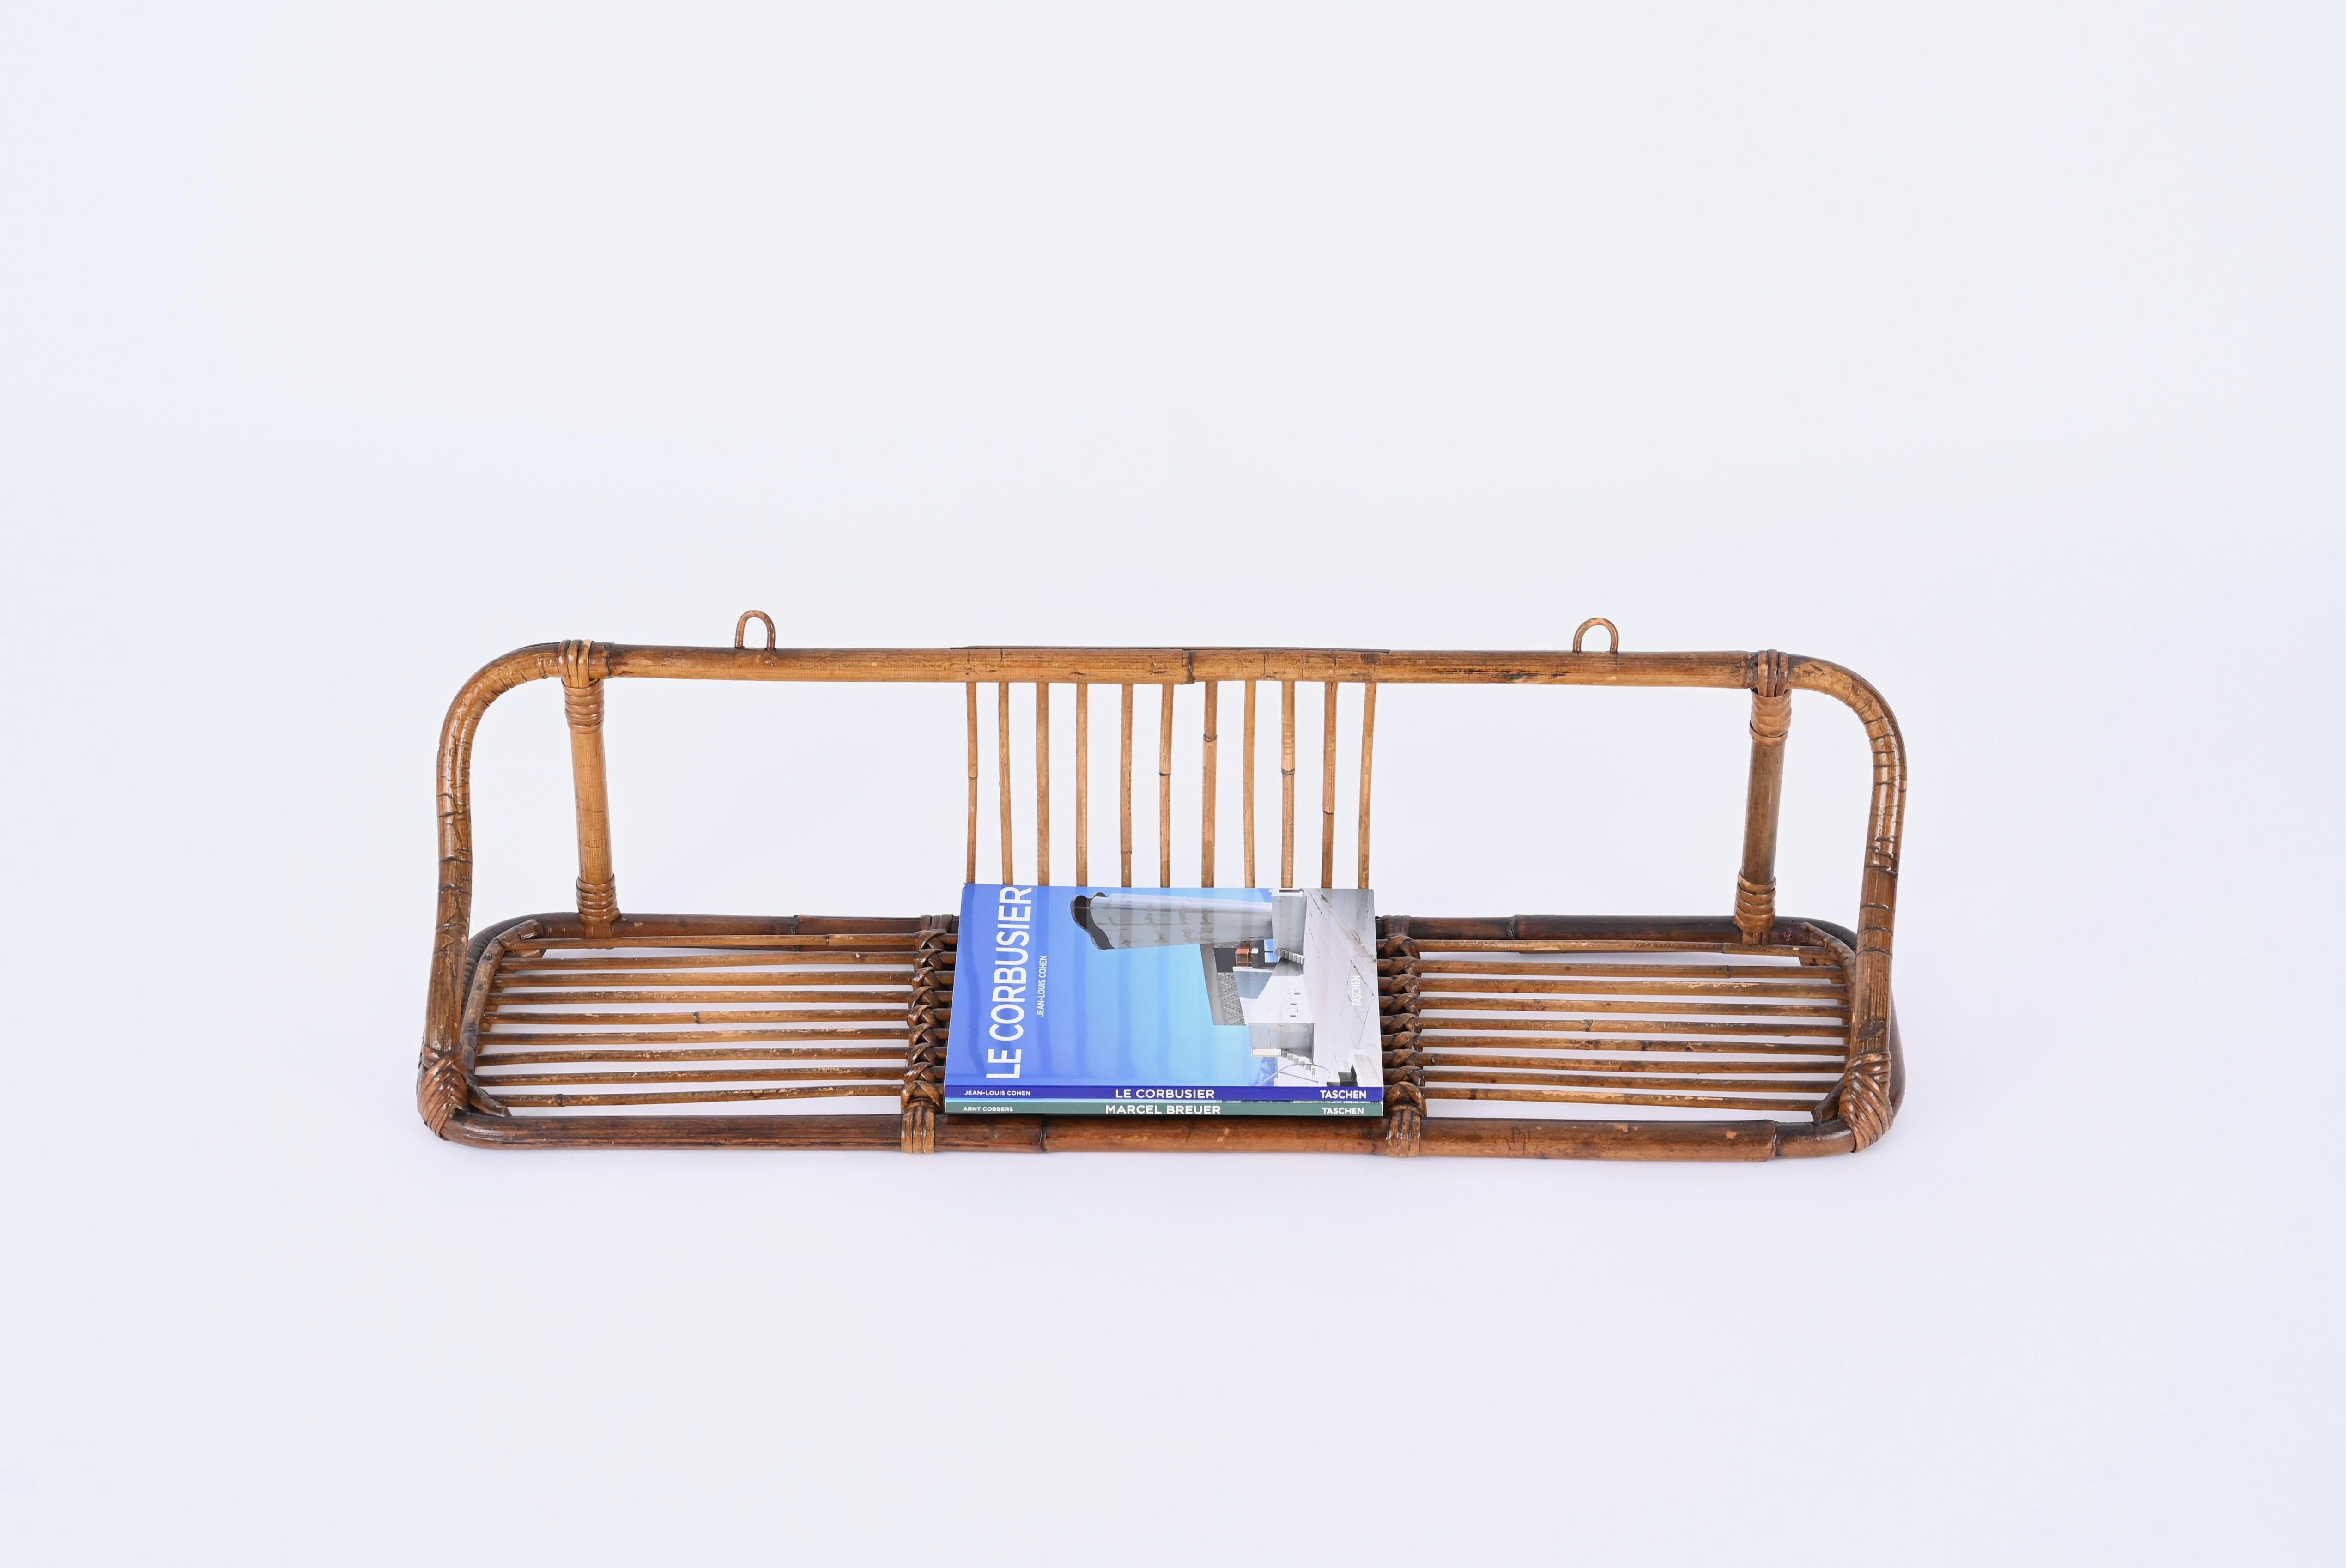  French Riviera Mid-Century Wall Shelf in Rattan and Bamboo, Italy, 1960s For Sale 5